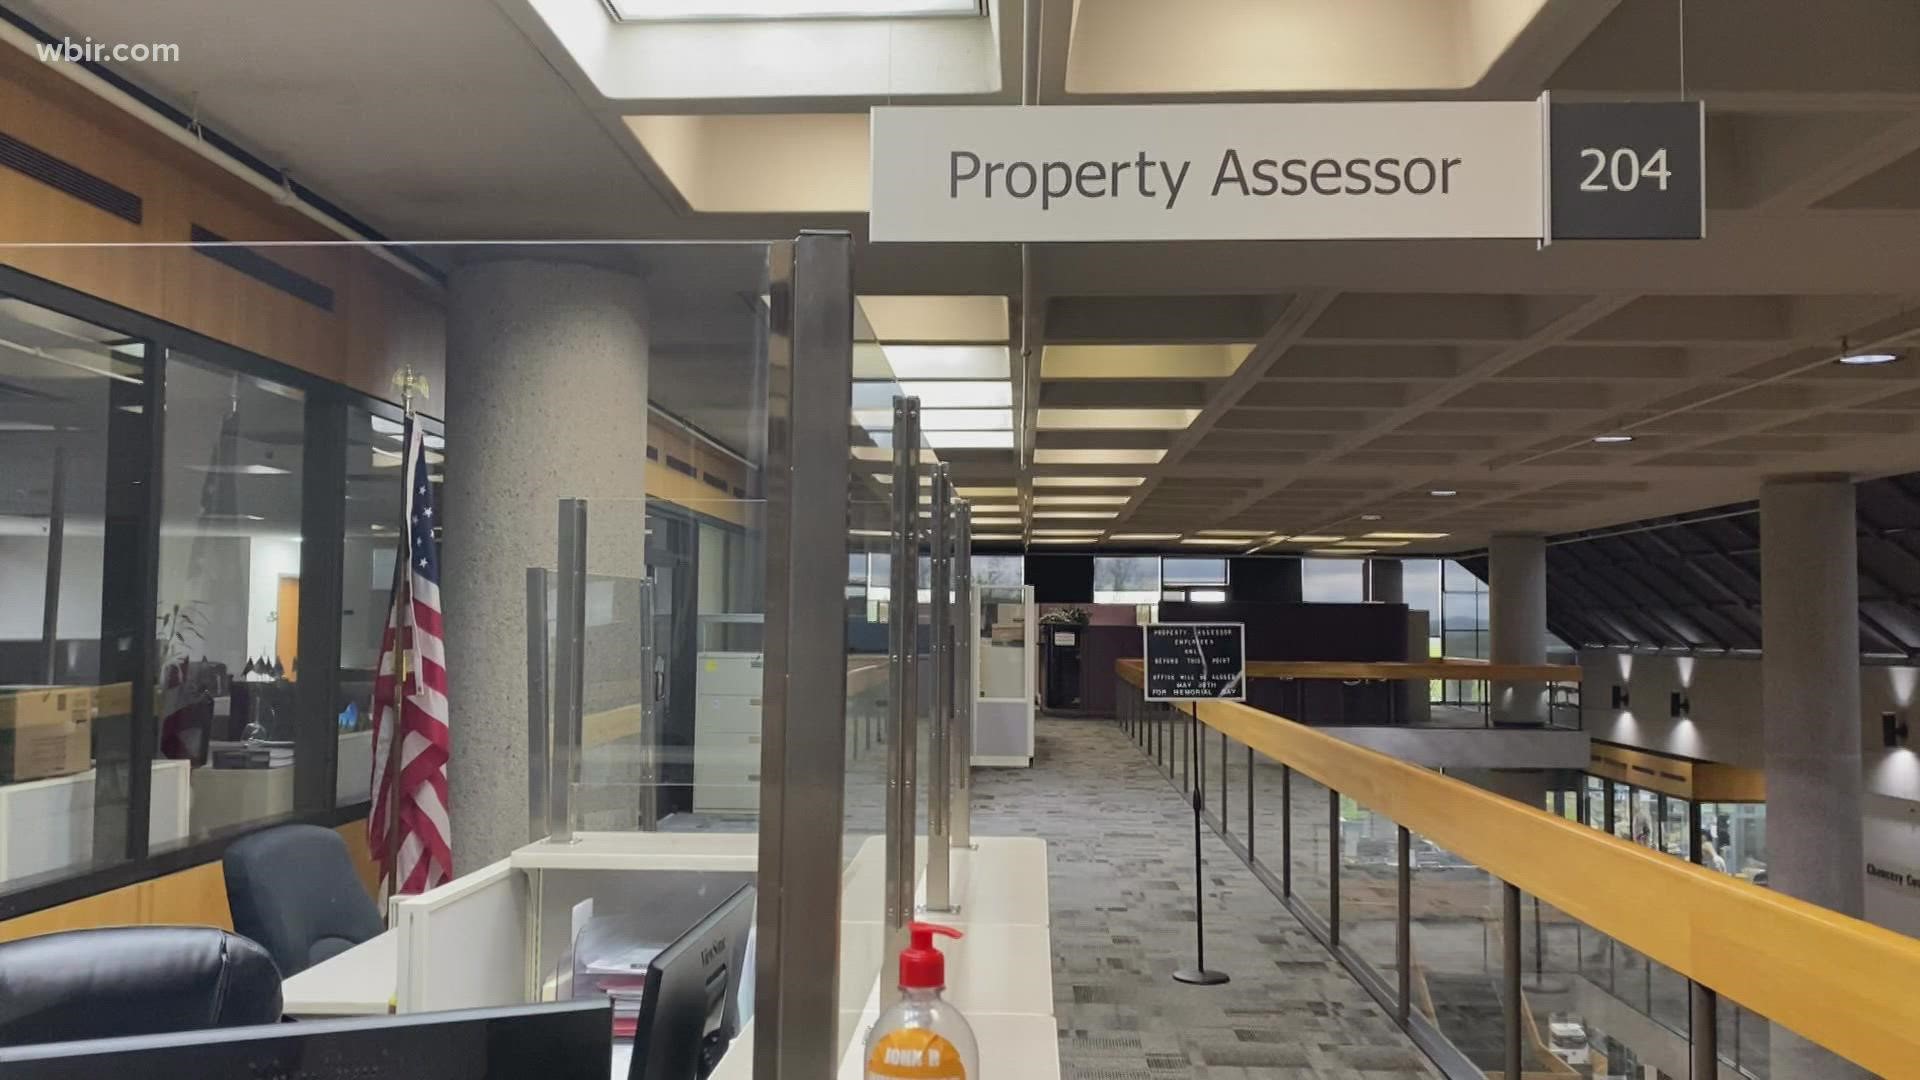 The county's property assessor said that the total appraisal in Knox County increased by 40% as a result of recent reassessments of property values.